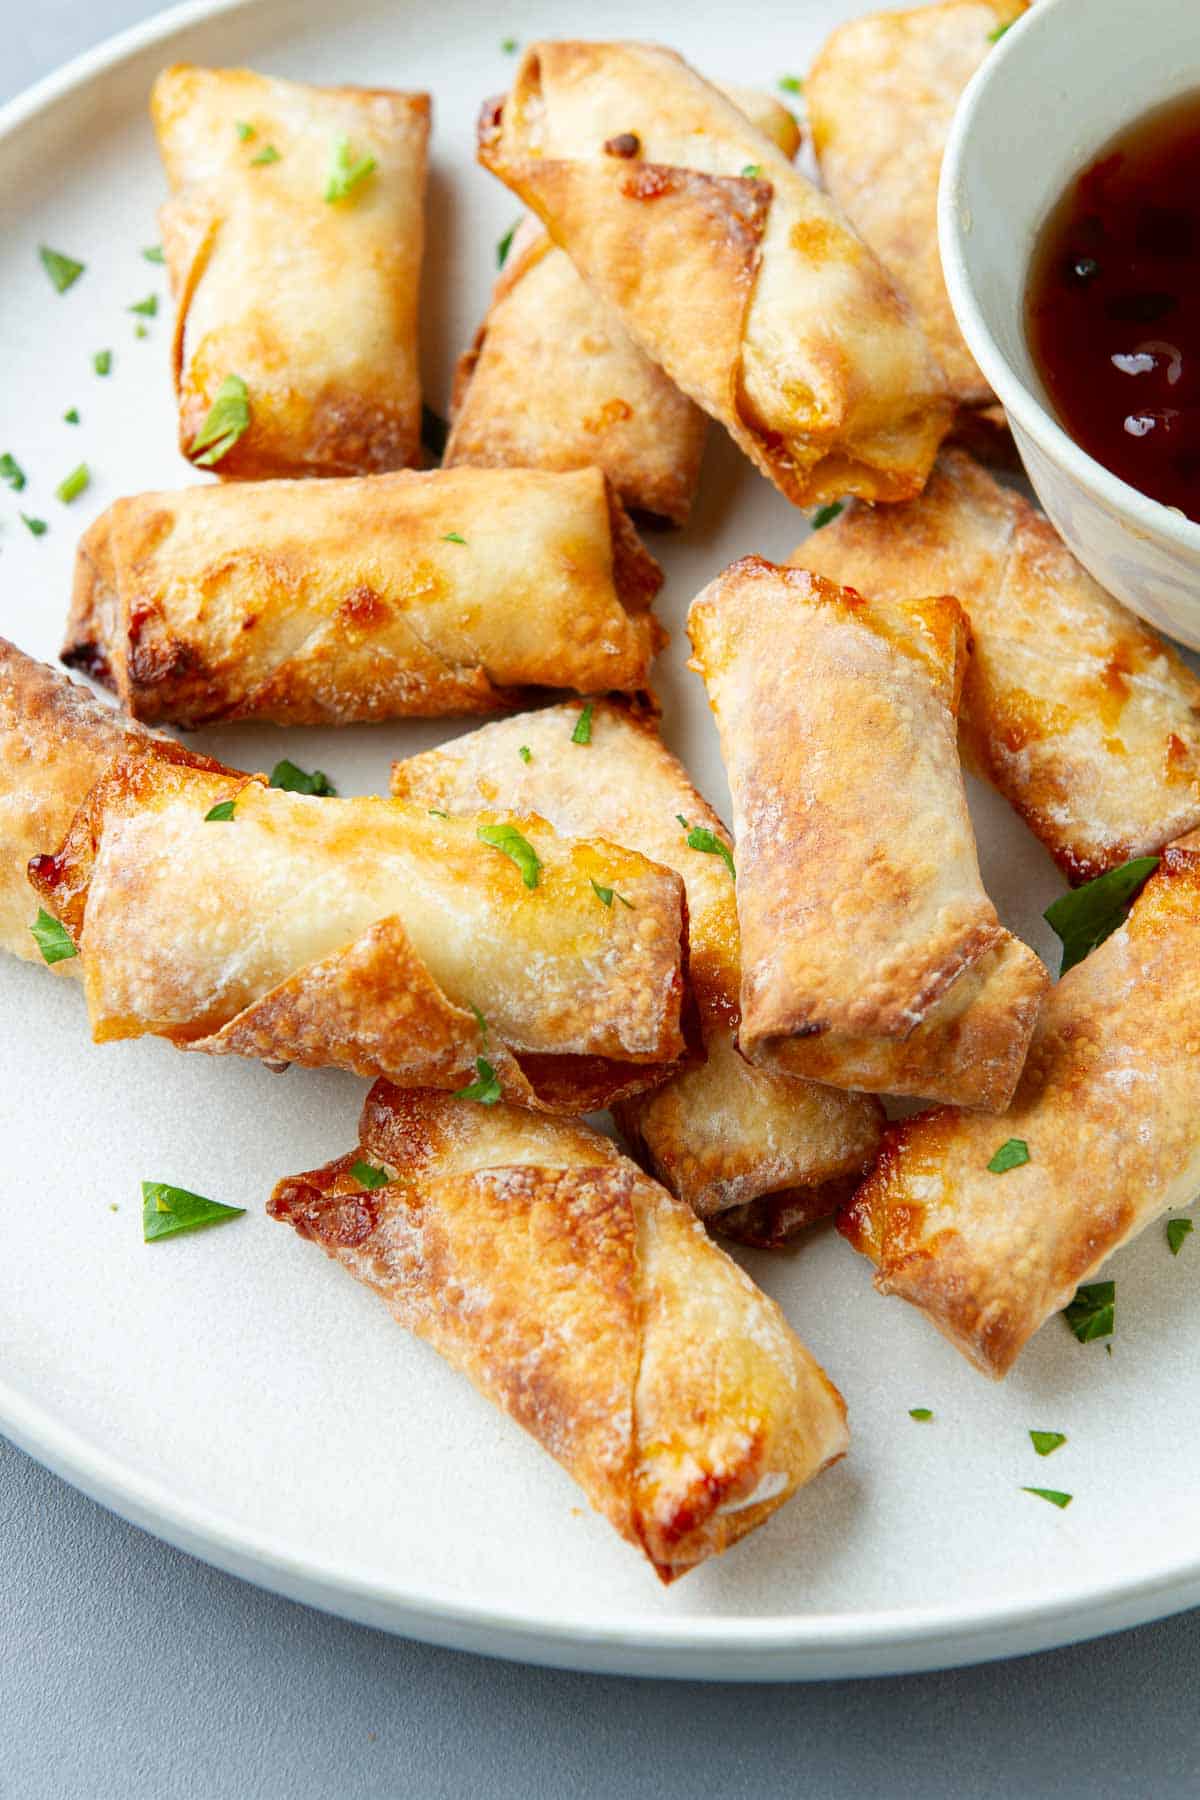 These mini egg rolls, filled with light cream cheese and pepper jelly and cooked in an air fryer, are your go-to appetizer for hassle-free entertaining. Simple, delicious, and loved by all! | New Year's Eve | Finger food | Recipes appetizers | Air fryer